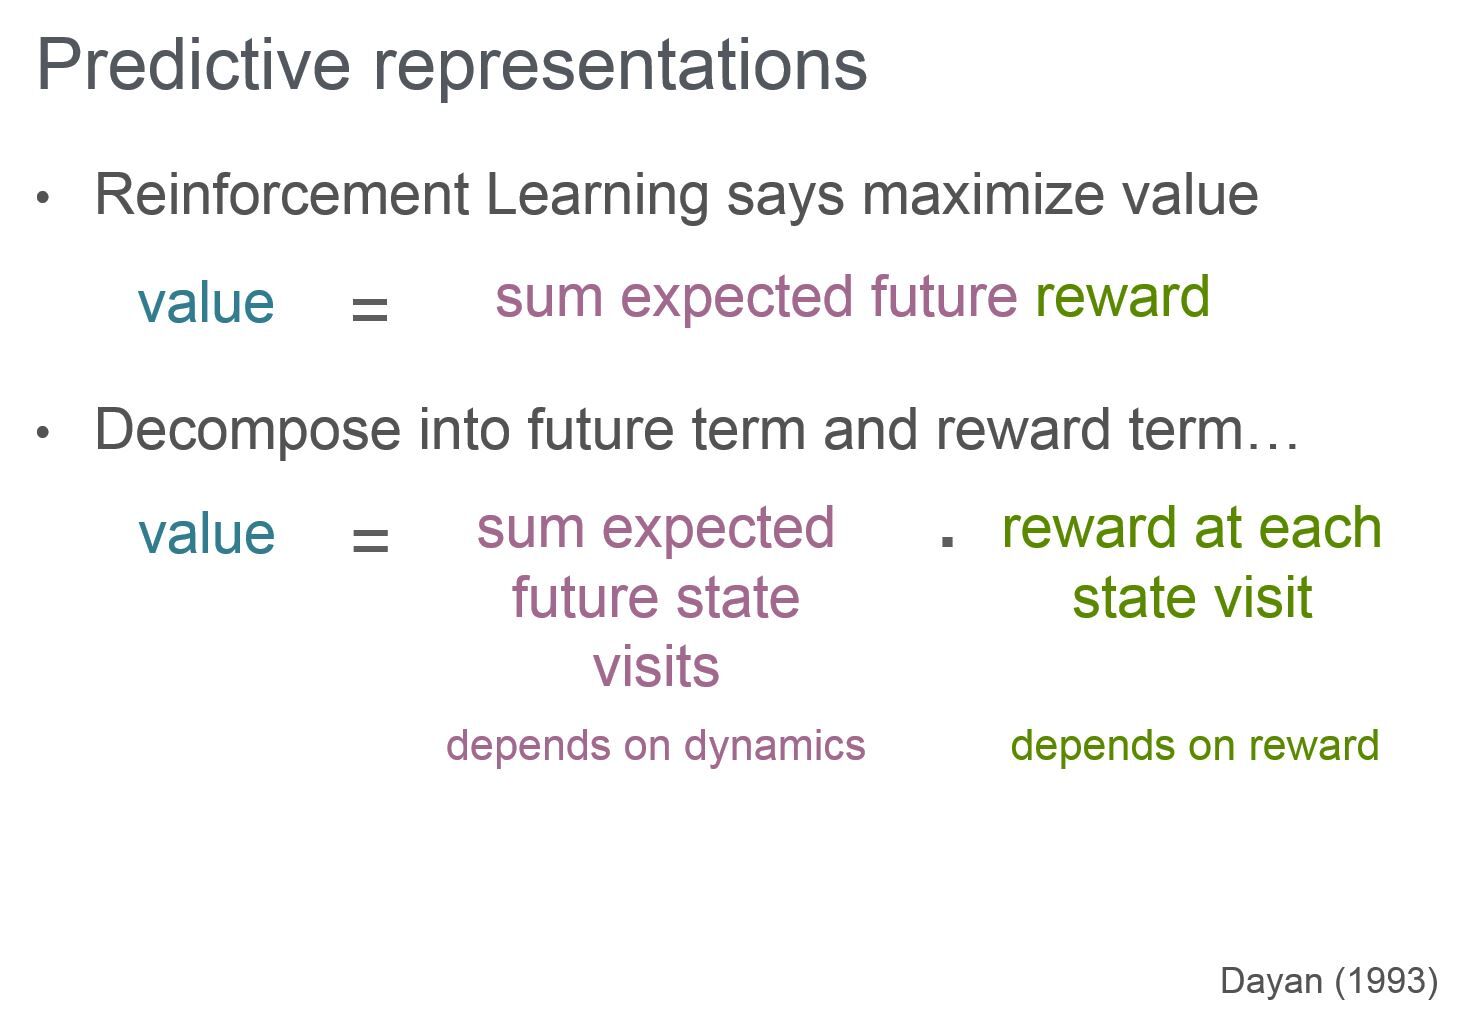 Predictive representations - reinforcement learning says maximise value; decompose into future term and reward term